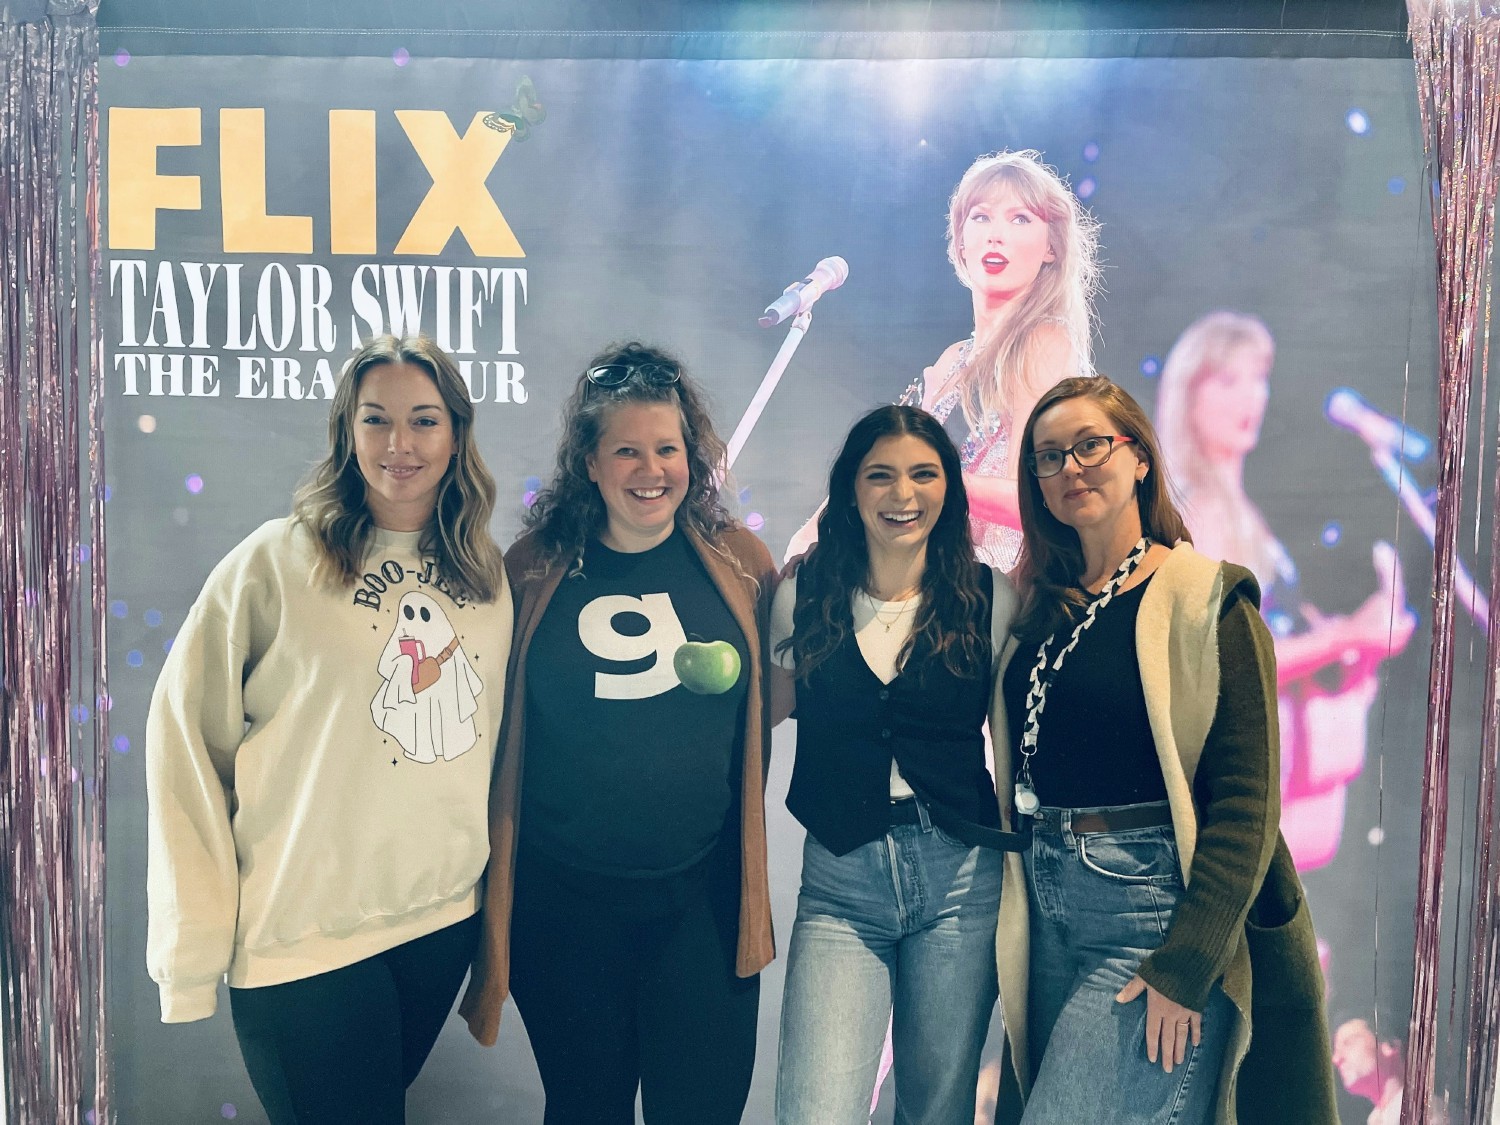 Our Indianapolis team takes on the Taylor Swift Tour !